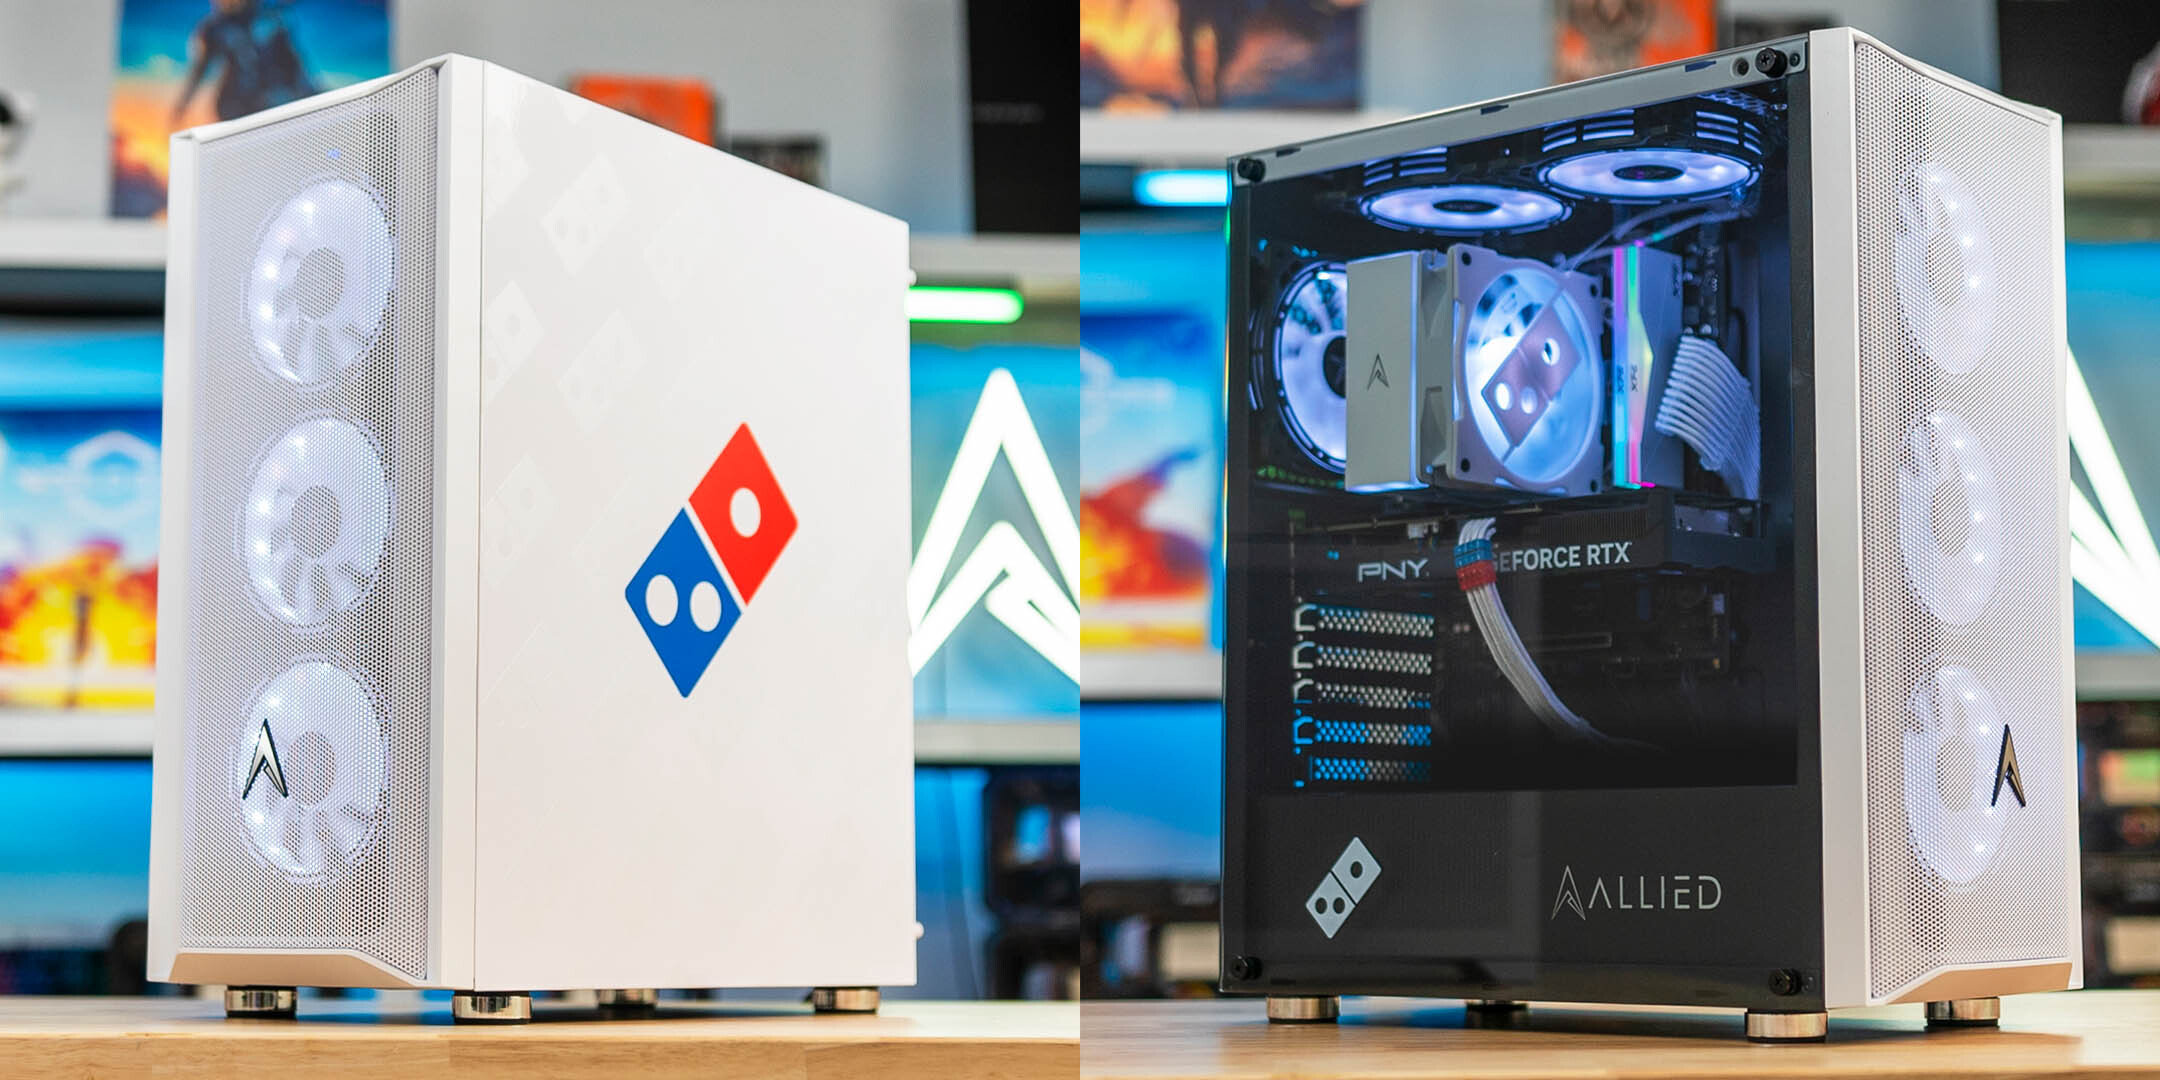 Allied x Domino's PC Giveaway